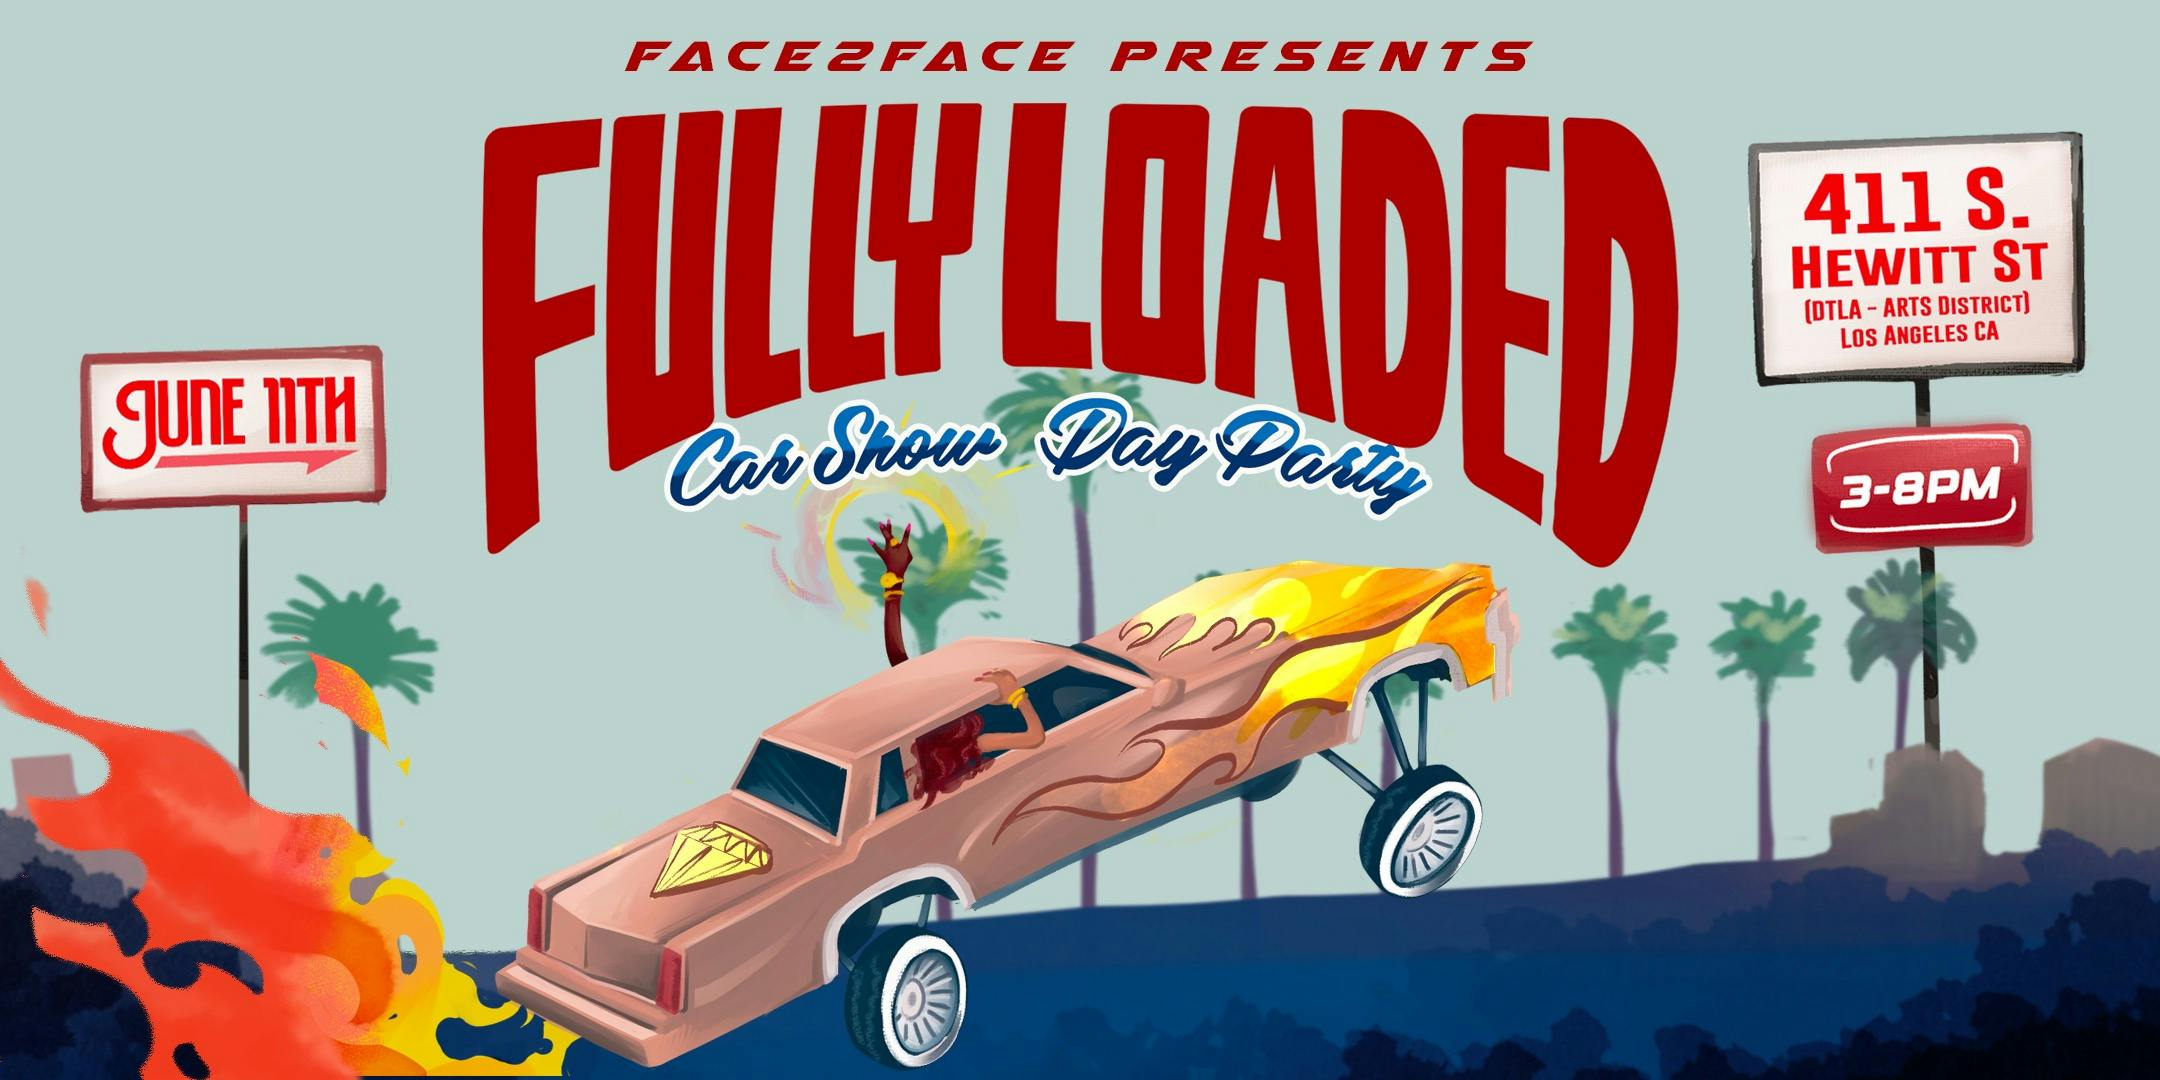 FACE2FACE Presents:  "FULLY LOADED" Car Show/ Day Party